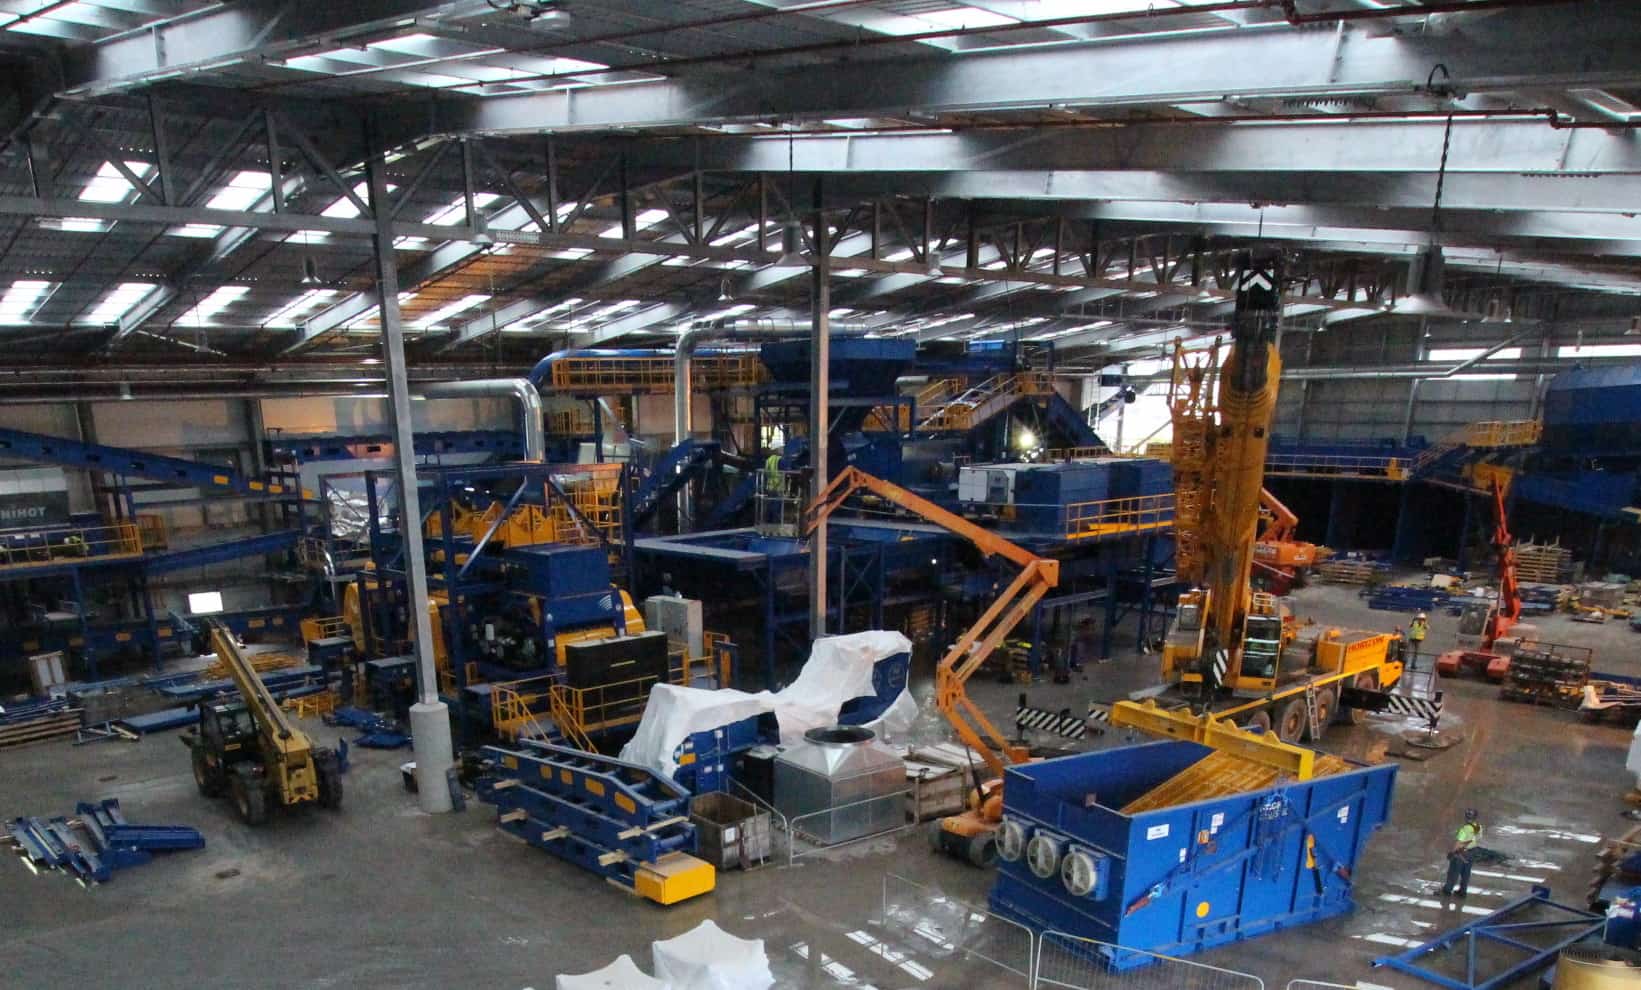 Installation of the sorting equipment is due to be completed by early 2017